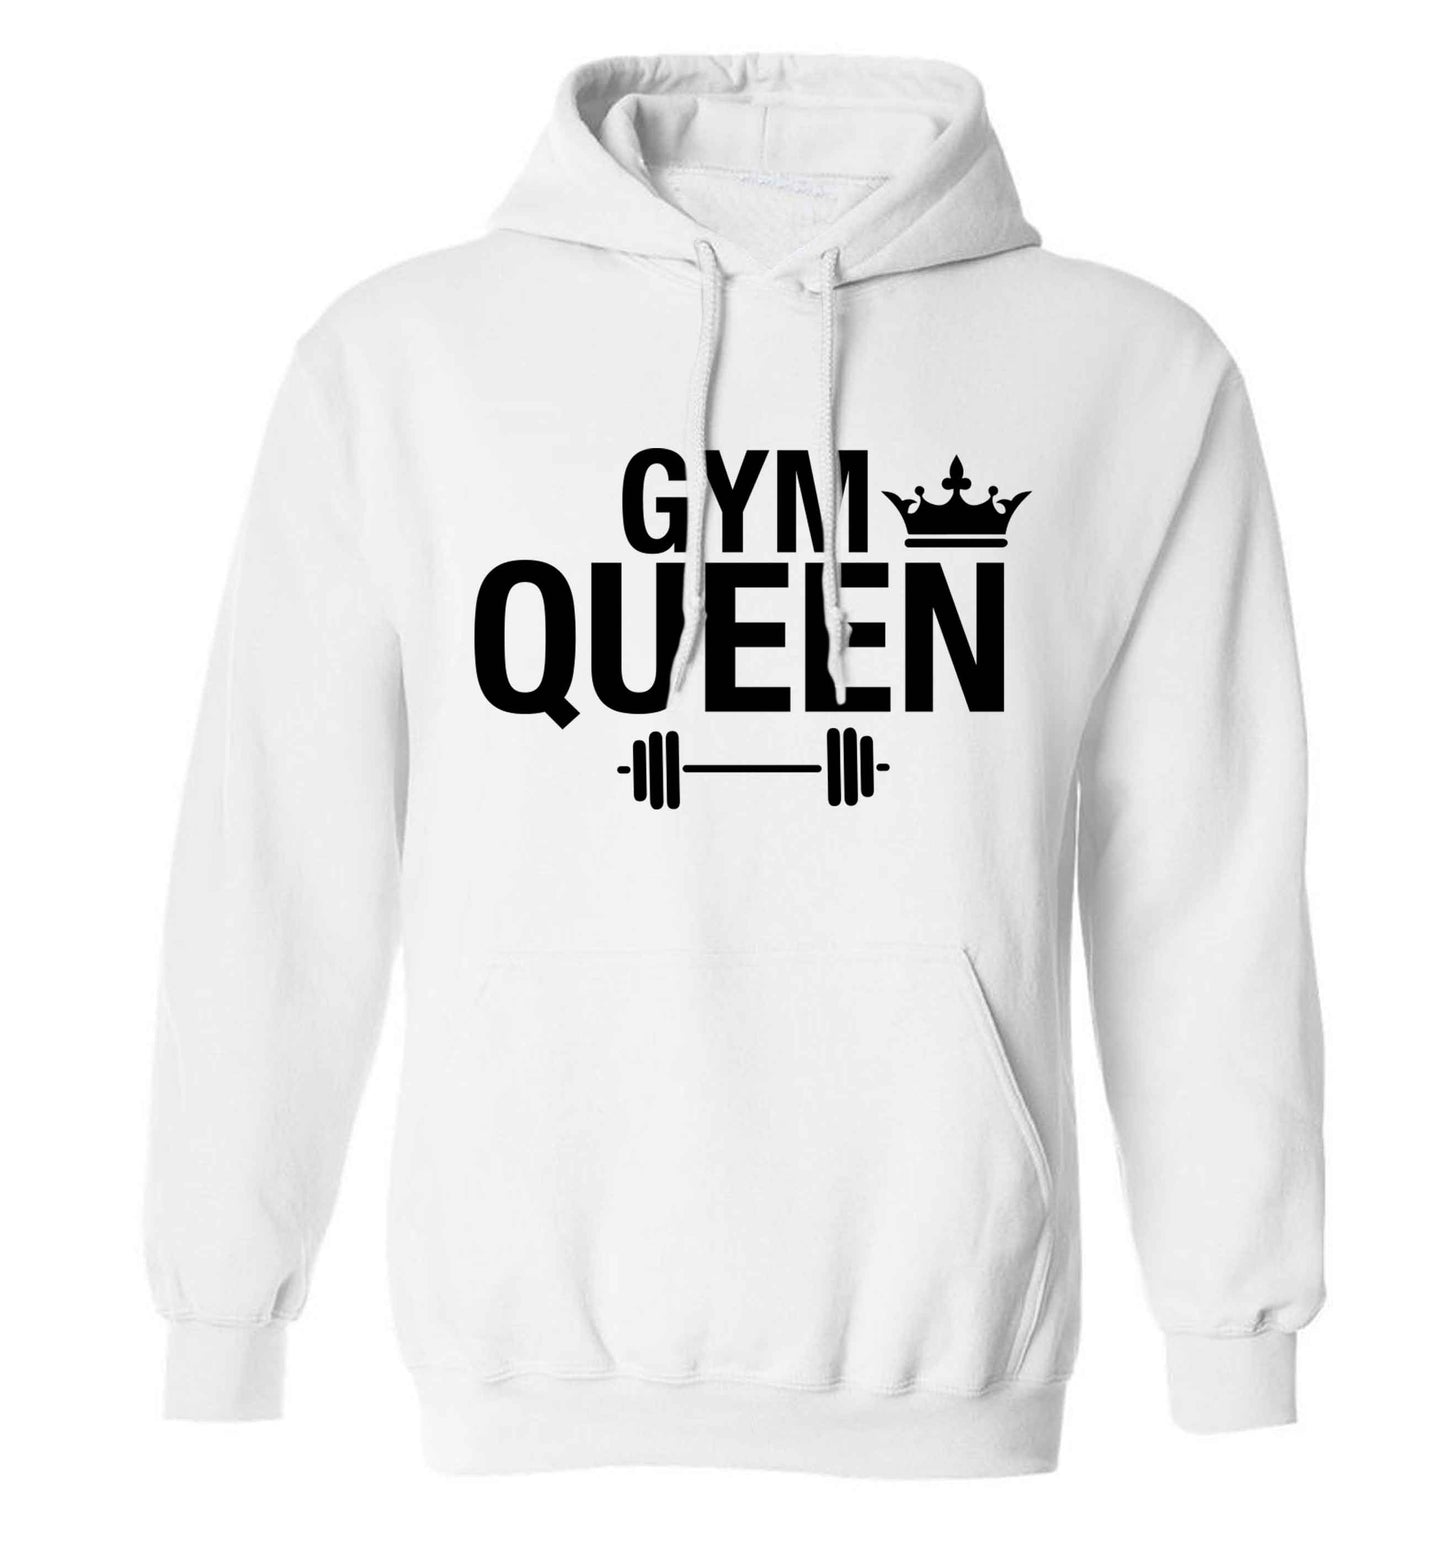 Gym queen adults unisex white hoodie 2XL